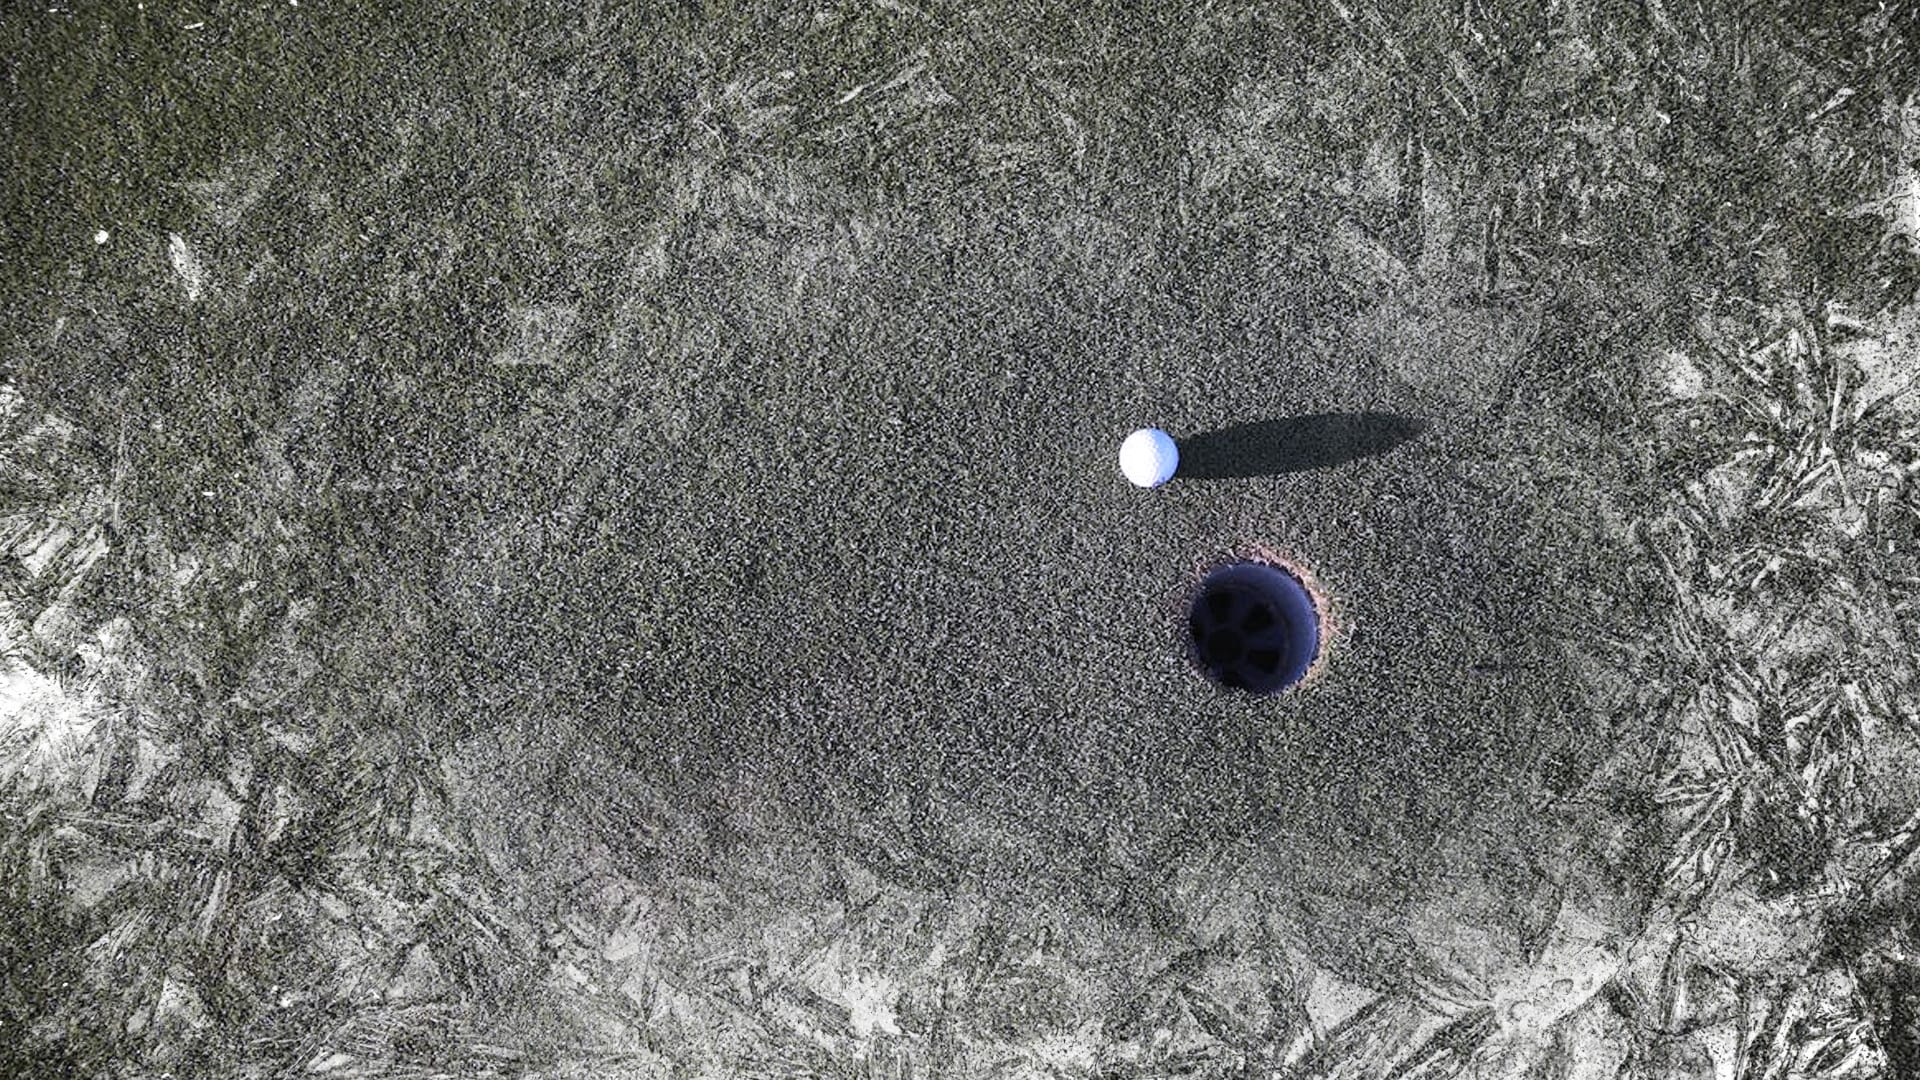 A frost-covered golf hole with a golf ball sitting close by